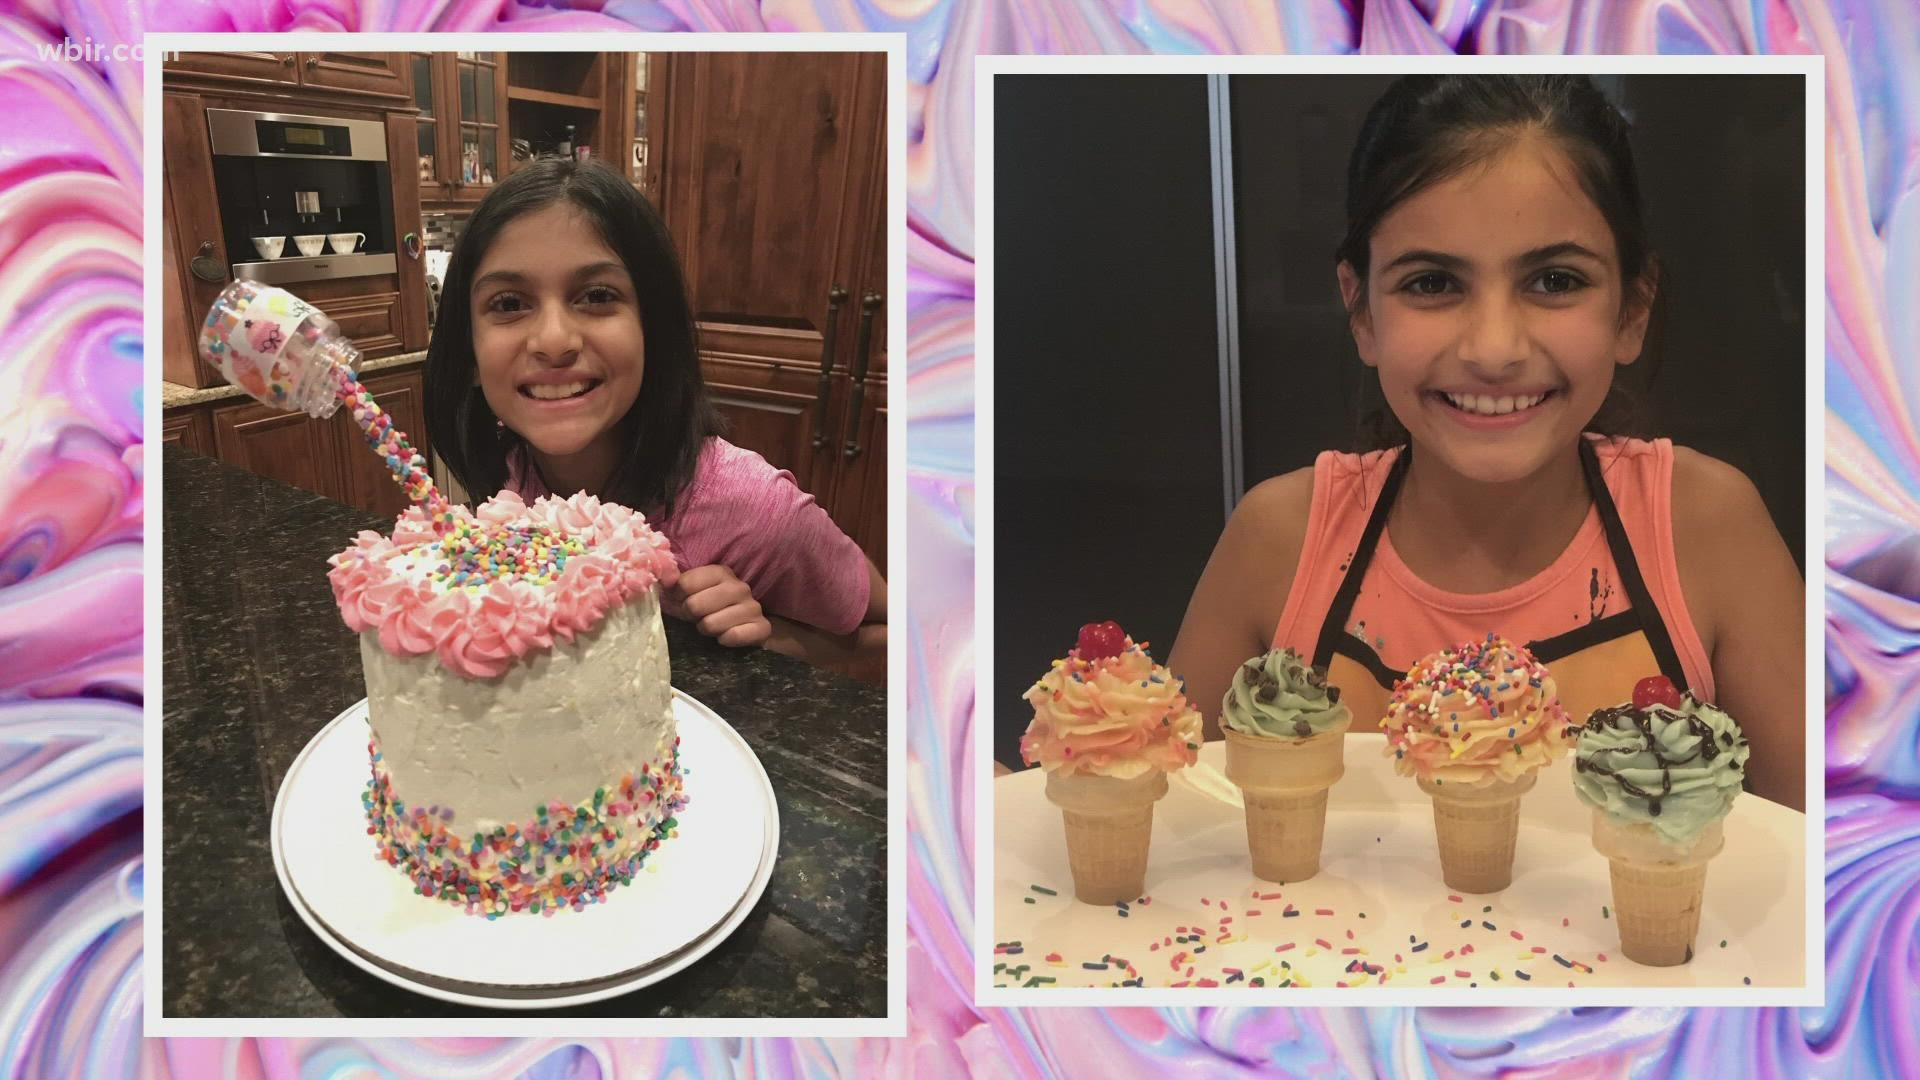 Nadya Alborz, 11, and Sarah Patel, 11, grew up baking, and are psyched to now be competing on one of their favorite baking competition shows.